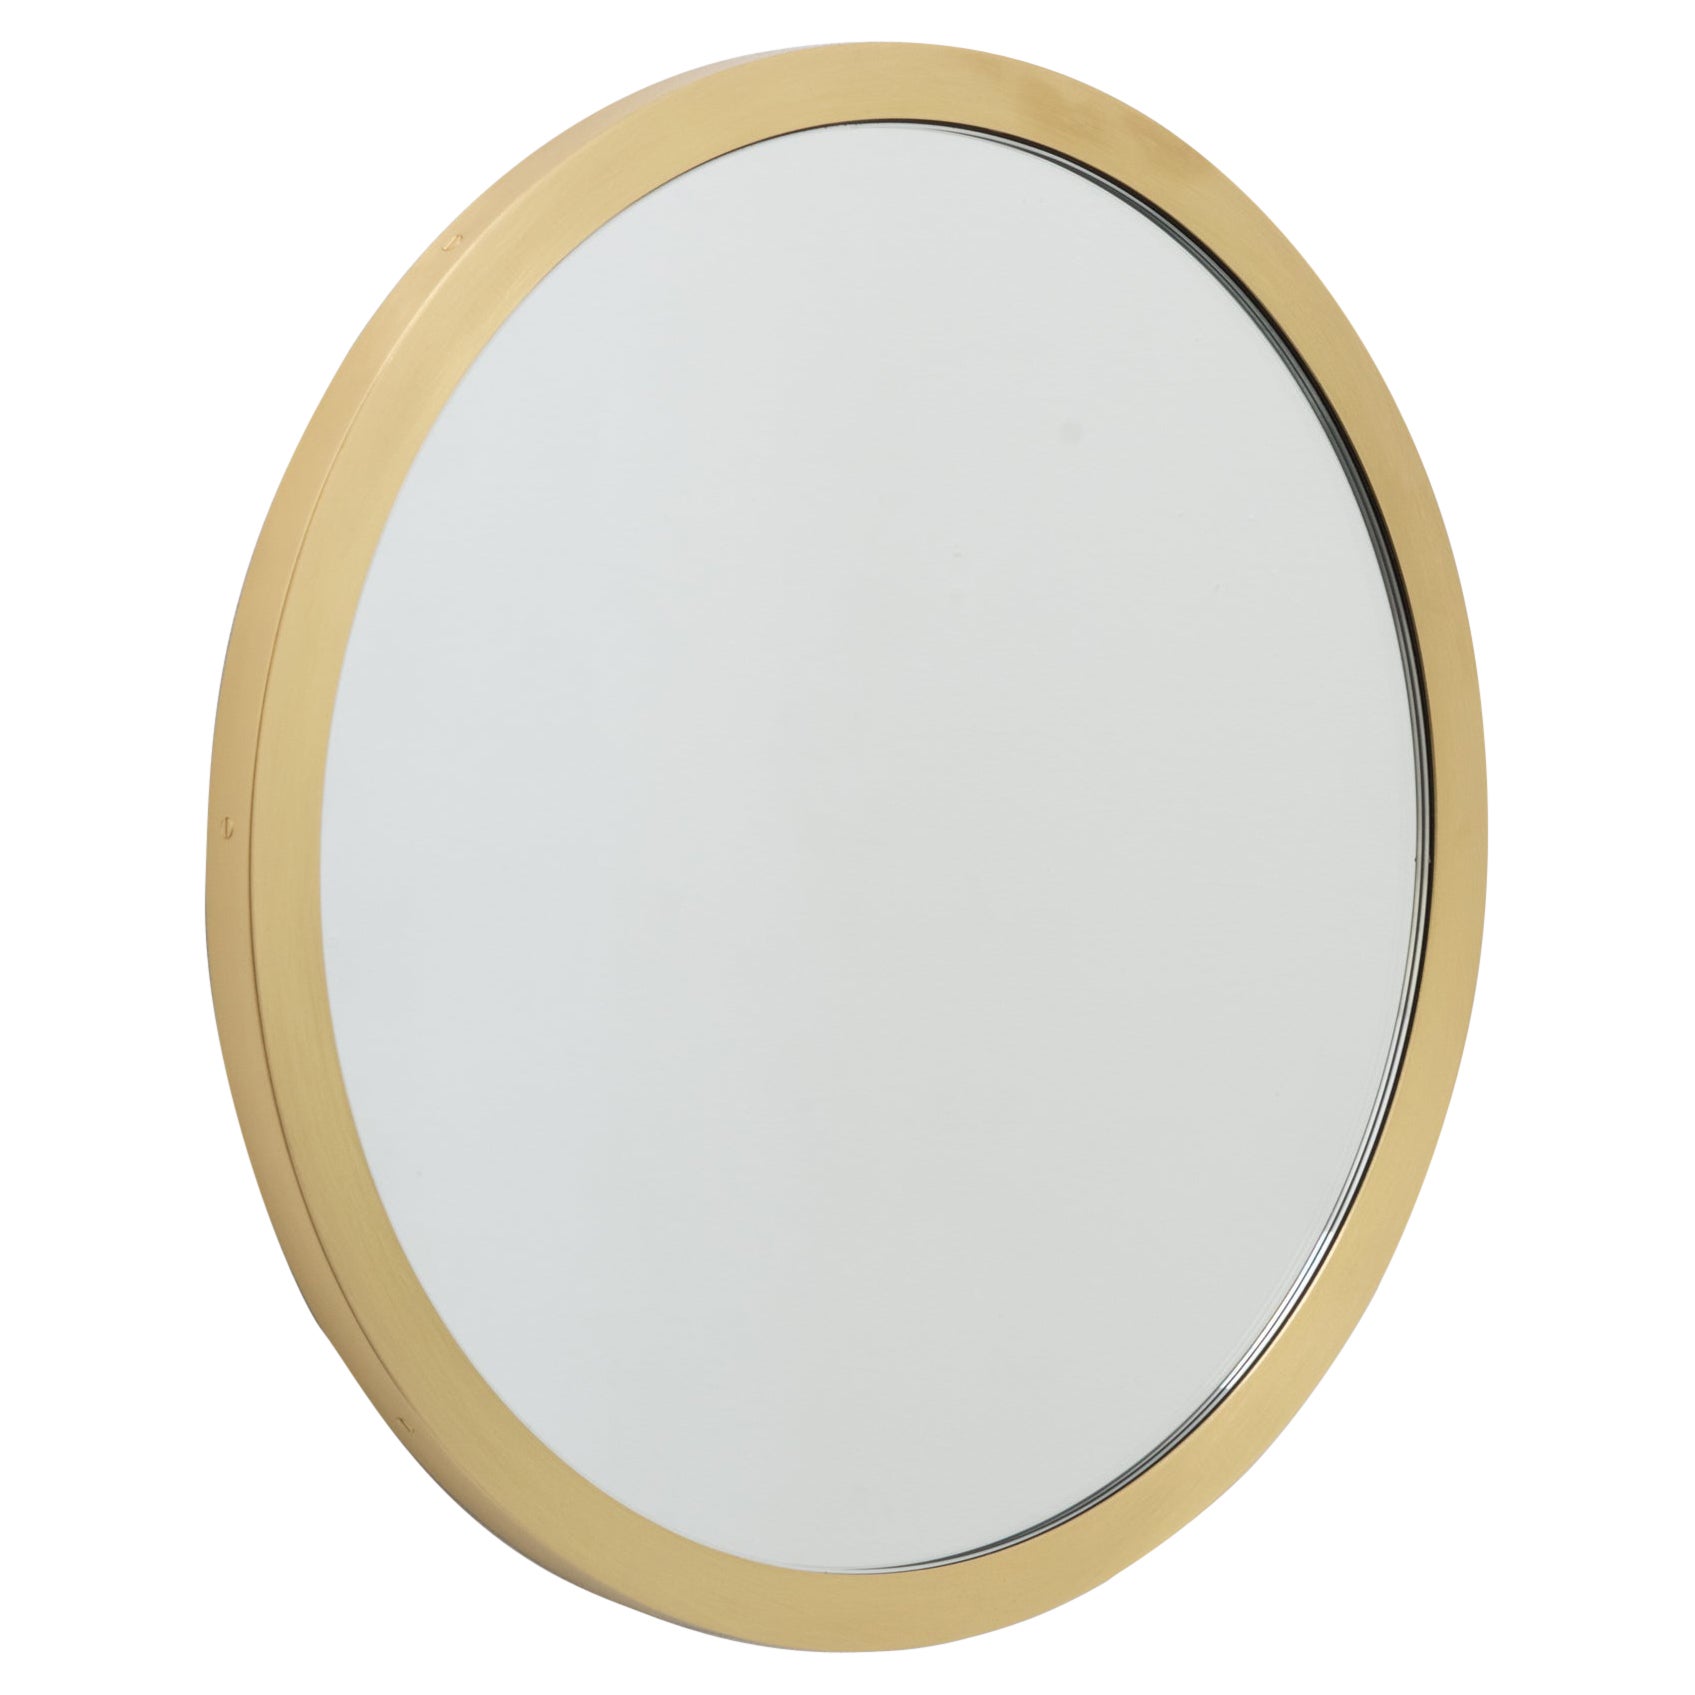 Orbis Round Minimalist Mirror with Full Brushed Brass Frame, Large For Sale